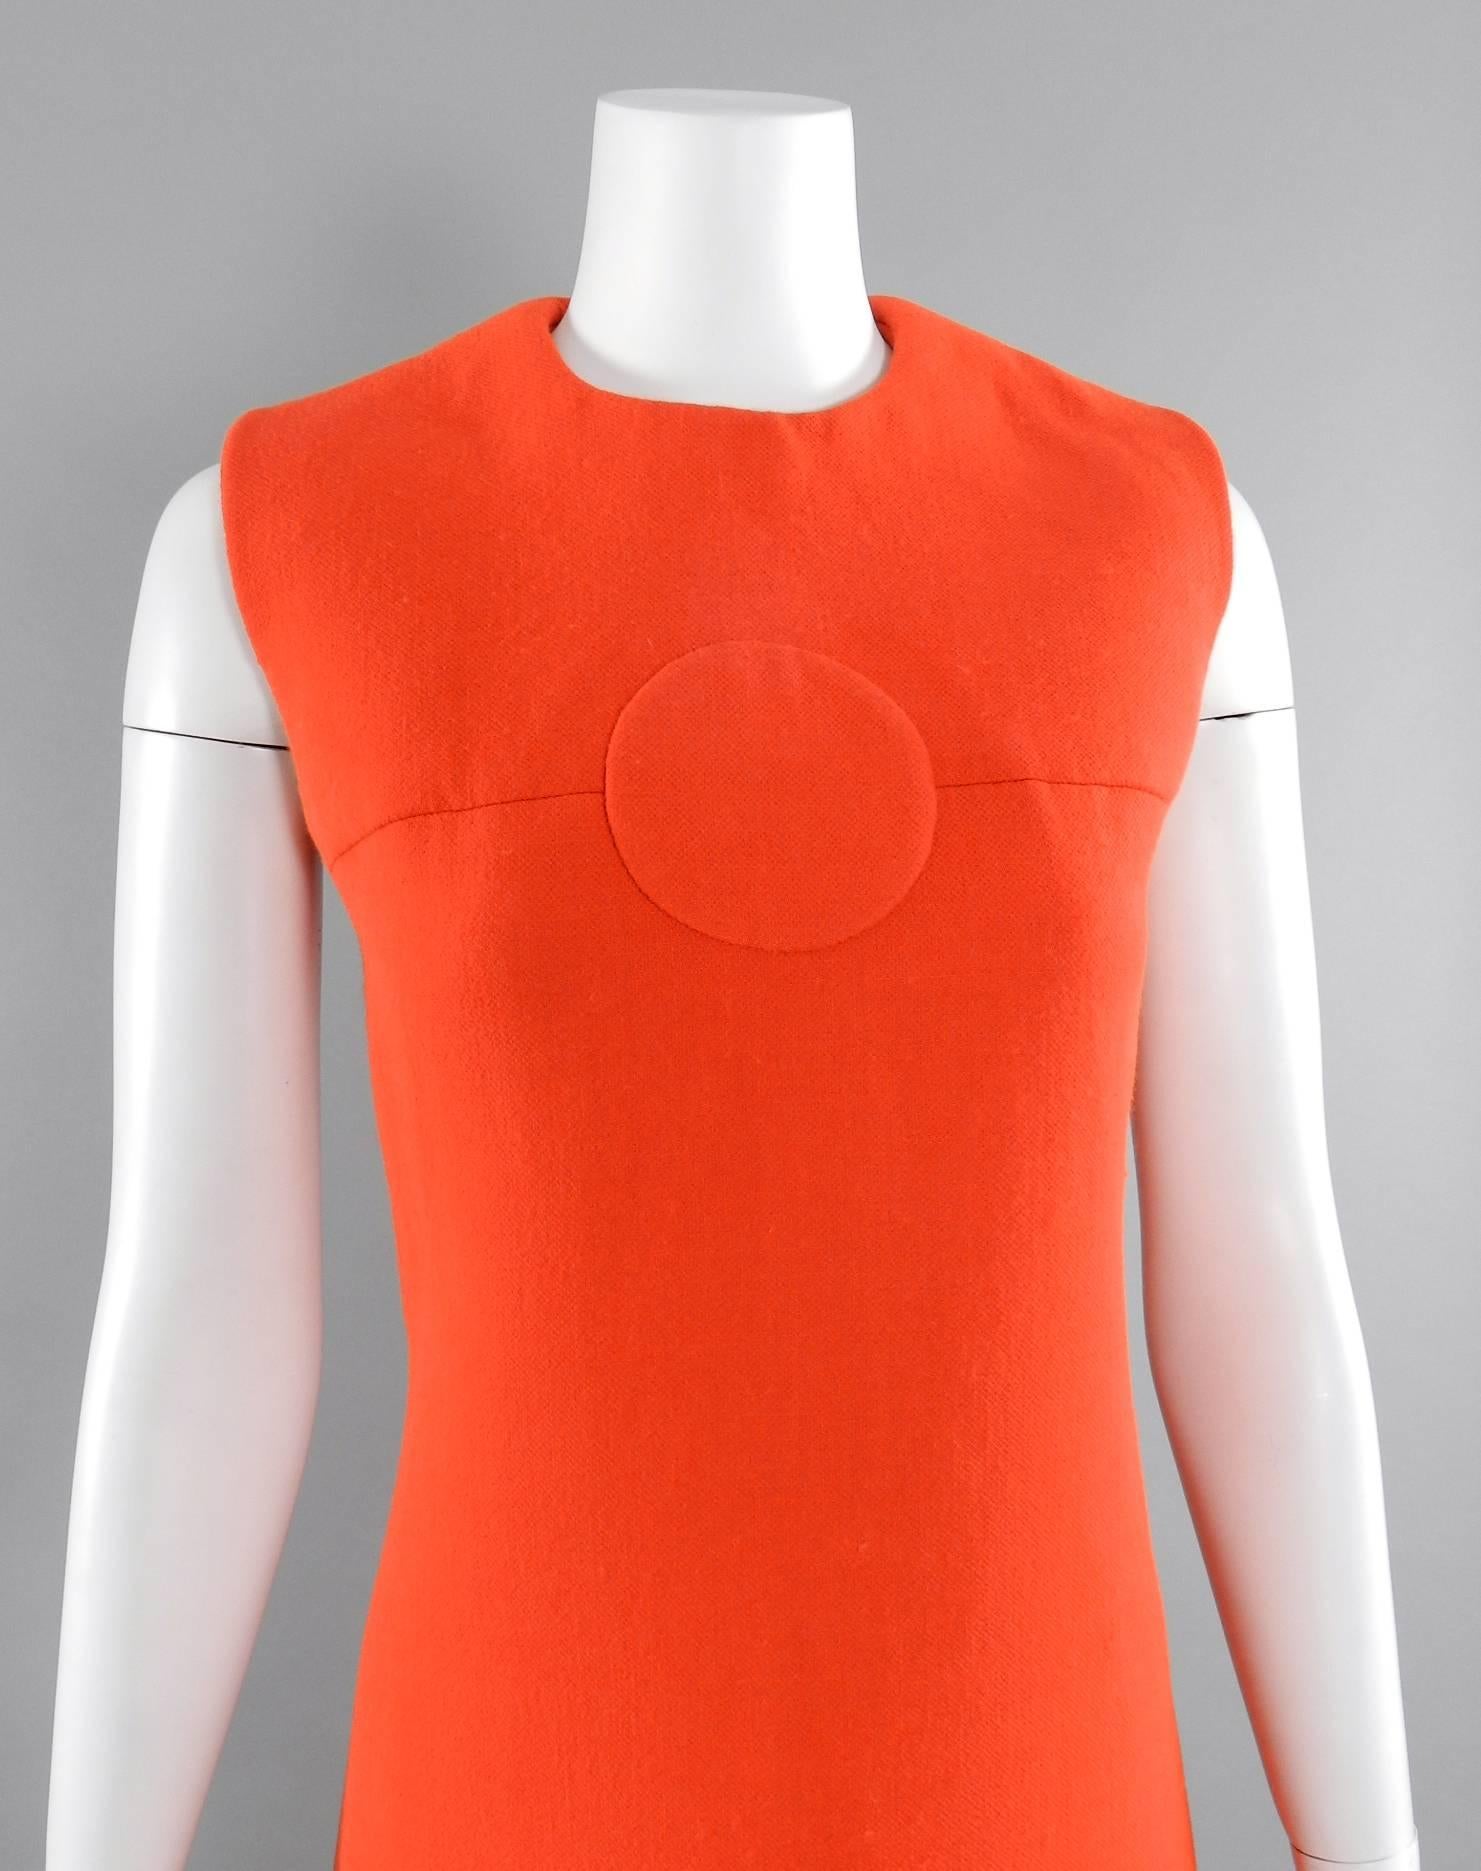 Pierre Cardin vintage late 1960's orange wool mod dress. Centre back zipper, sleeveless design, op-art circular inset at front neck, banding at dress hem. Fully lined. Excellent drycleaned vintage condition. Overall approximate modern size USA 8/10.